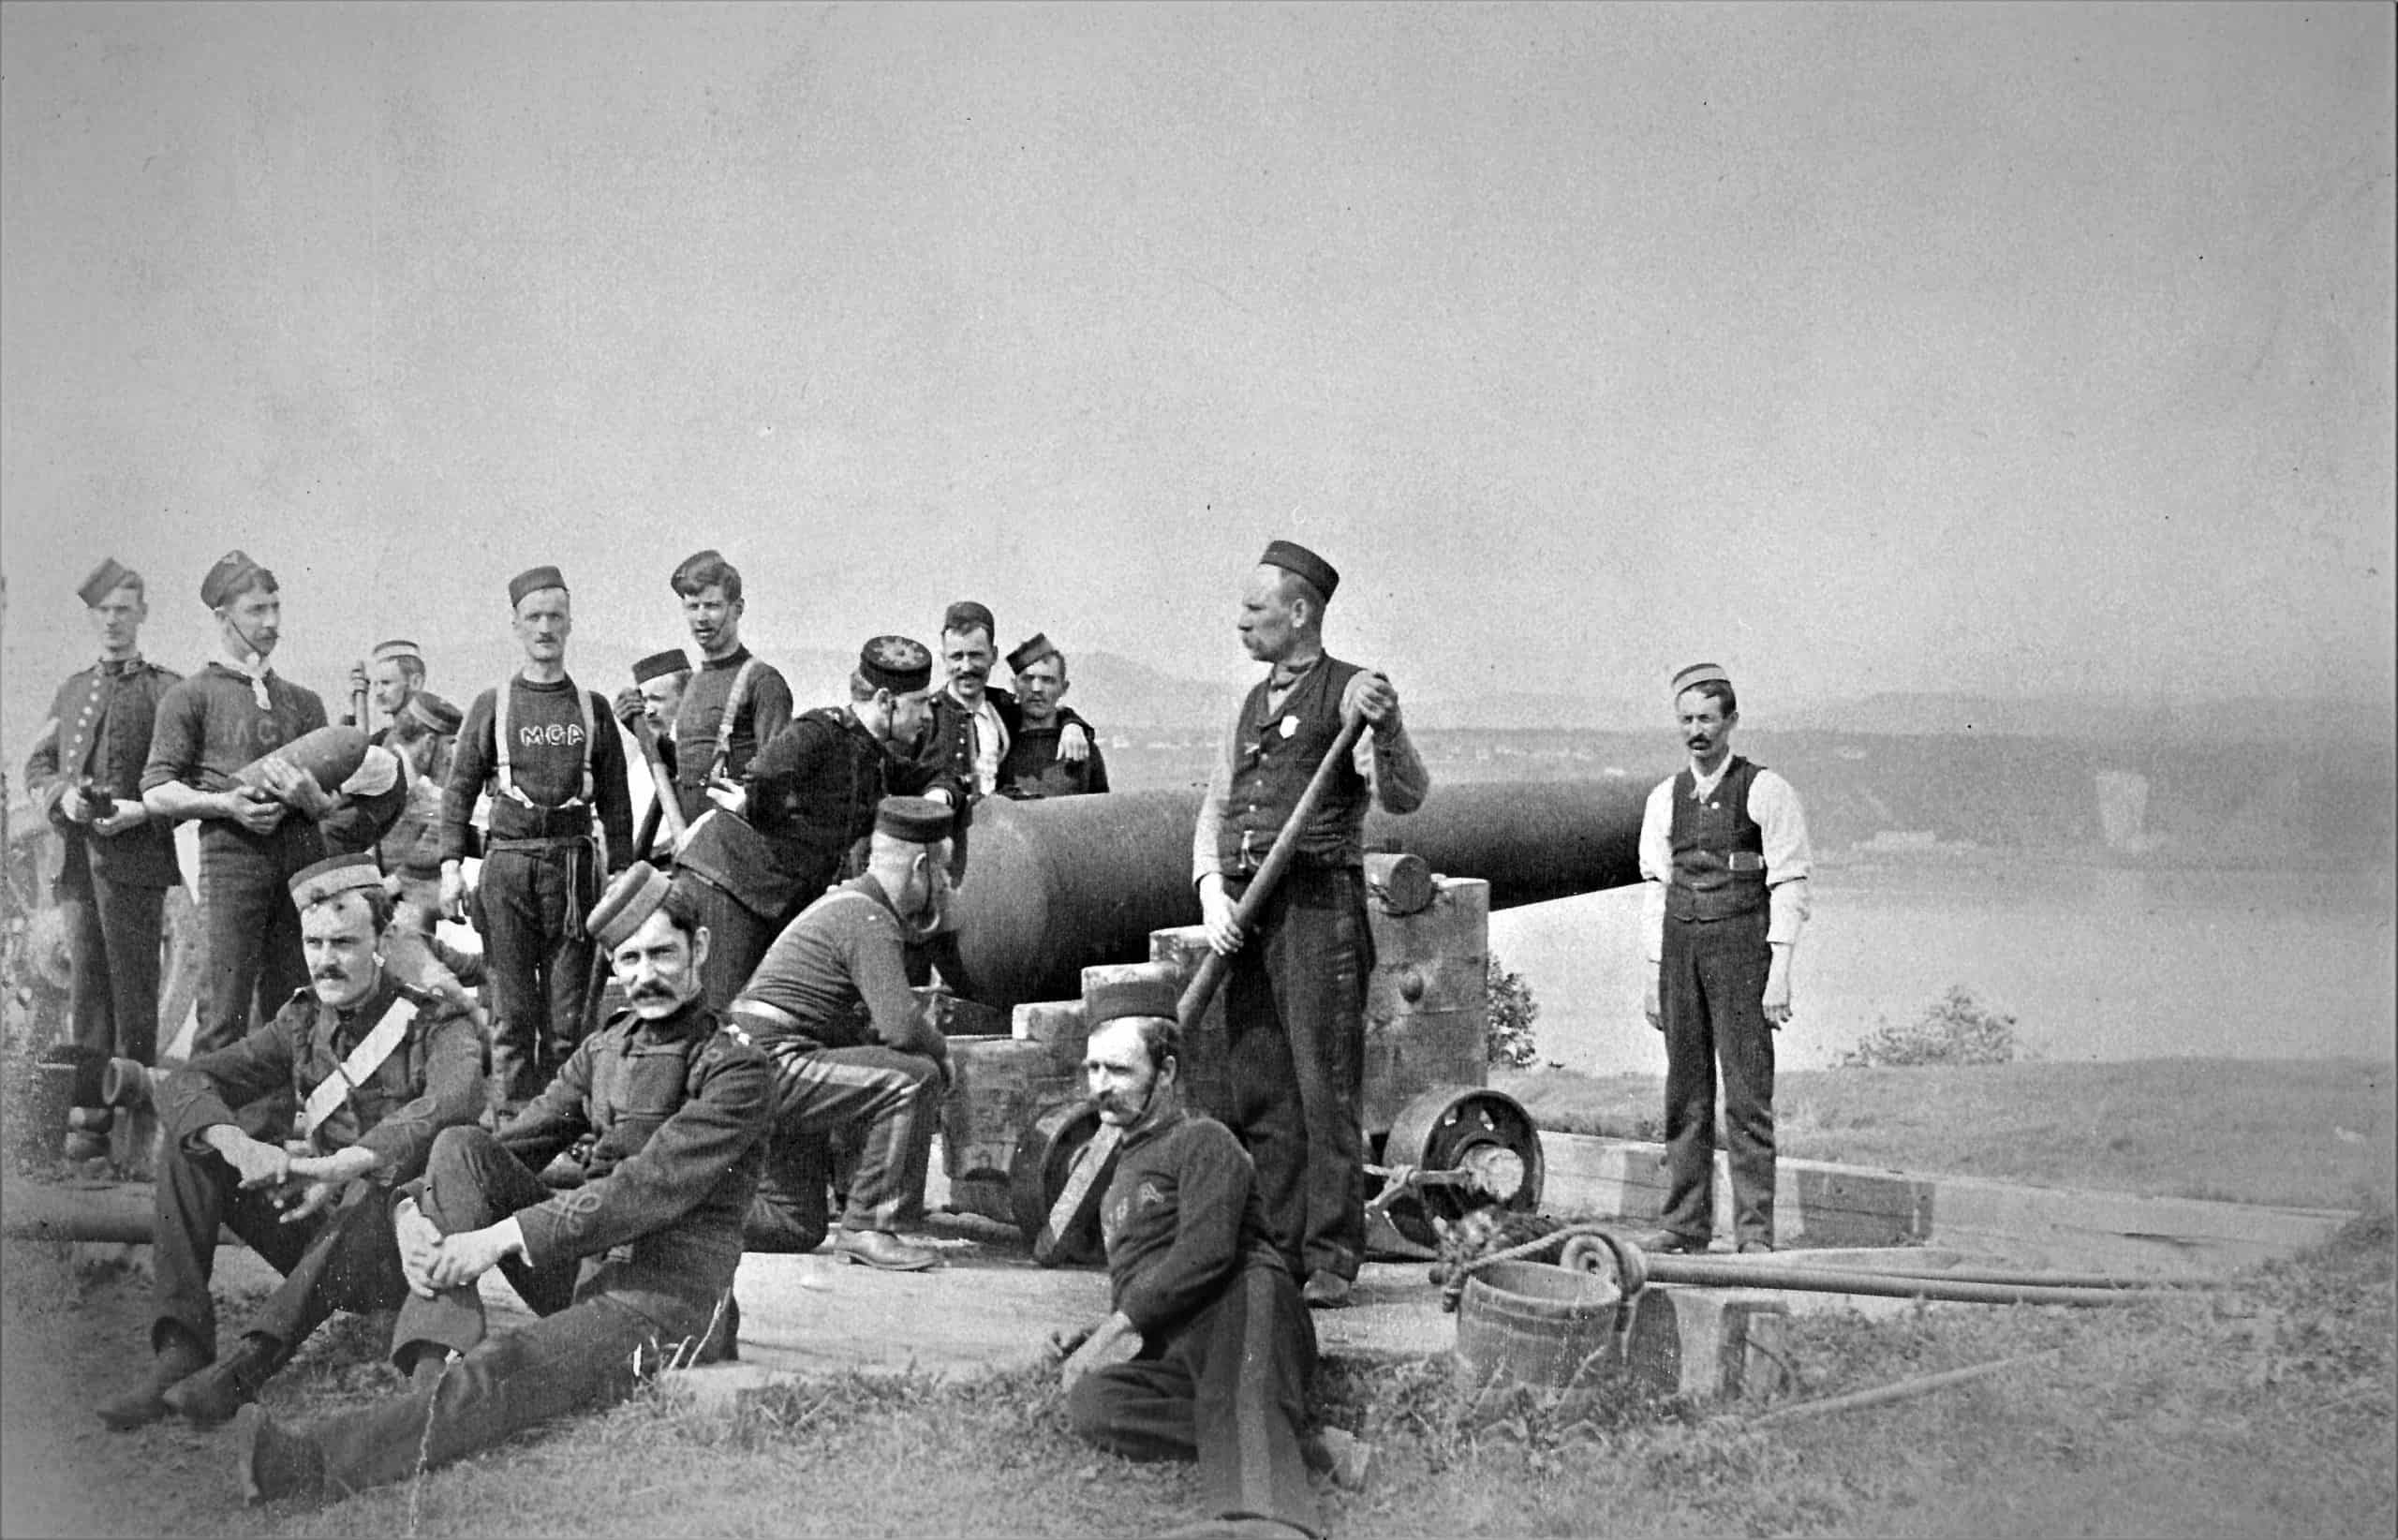 Dominion-of-Canada-Artillery-Association-Practice-Camp-Ile-dOrleans-Quebec-1890-2-scaled